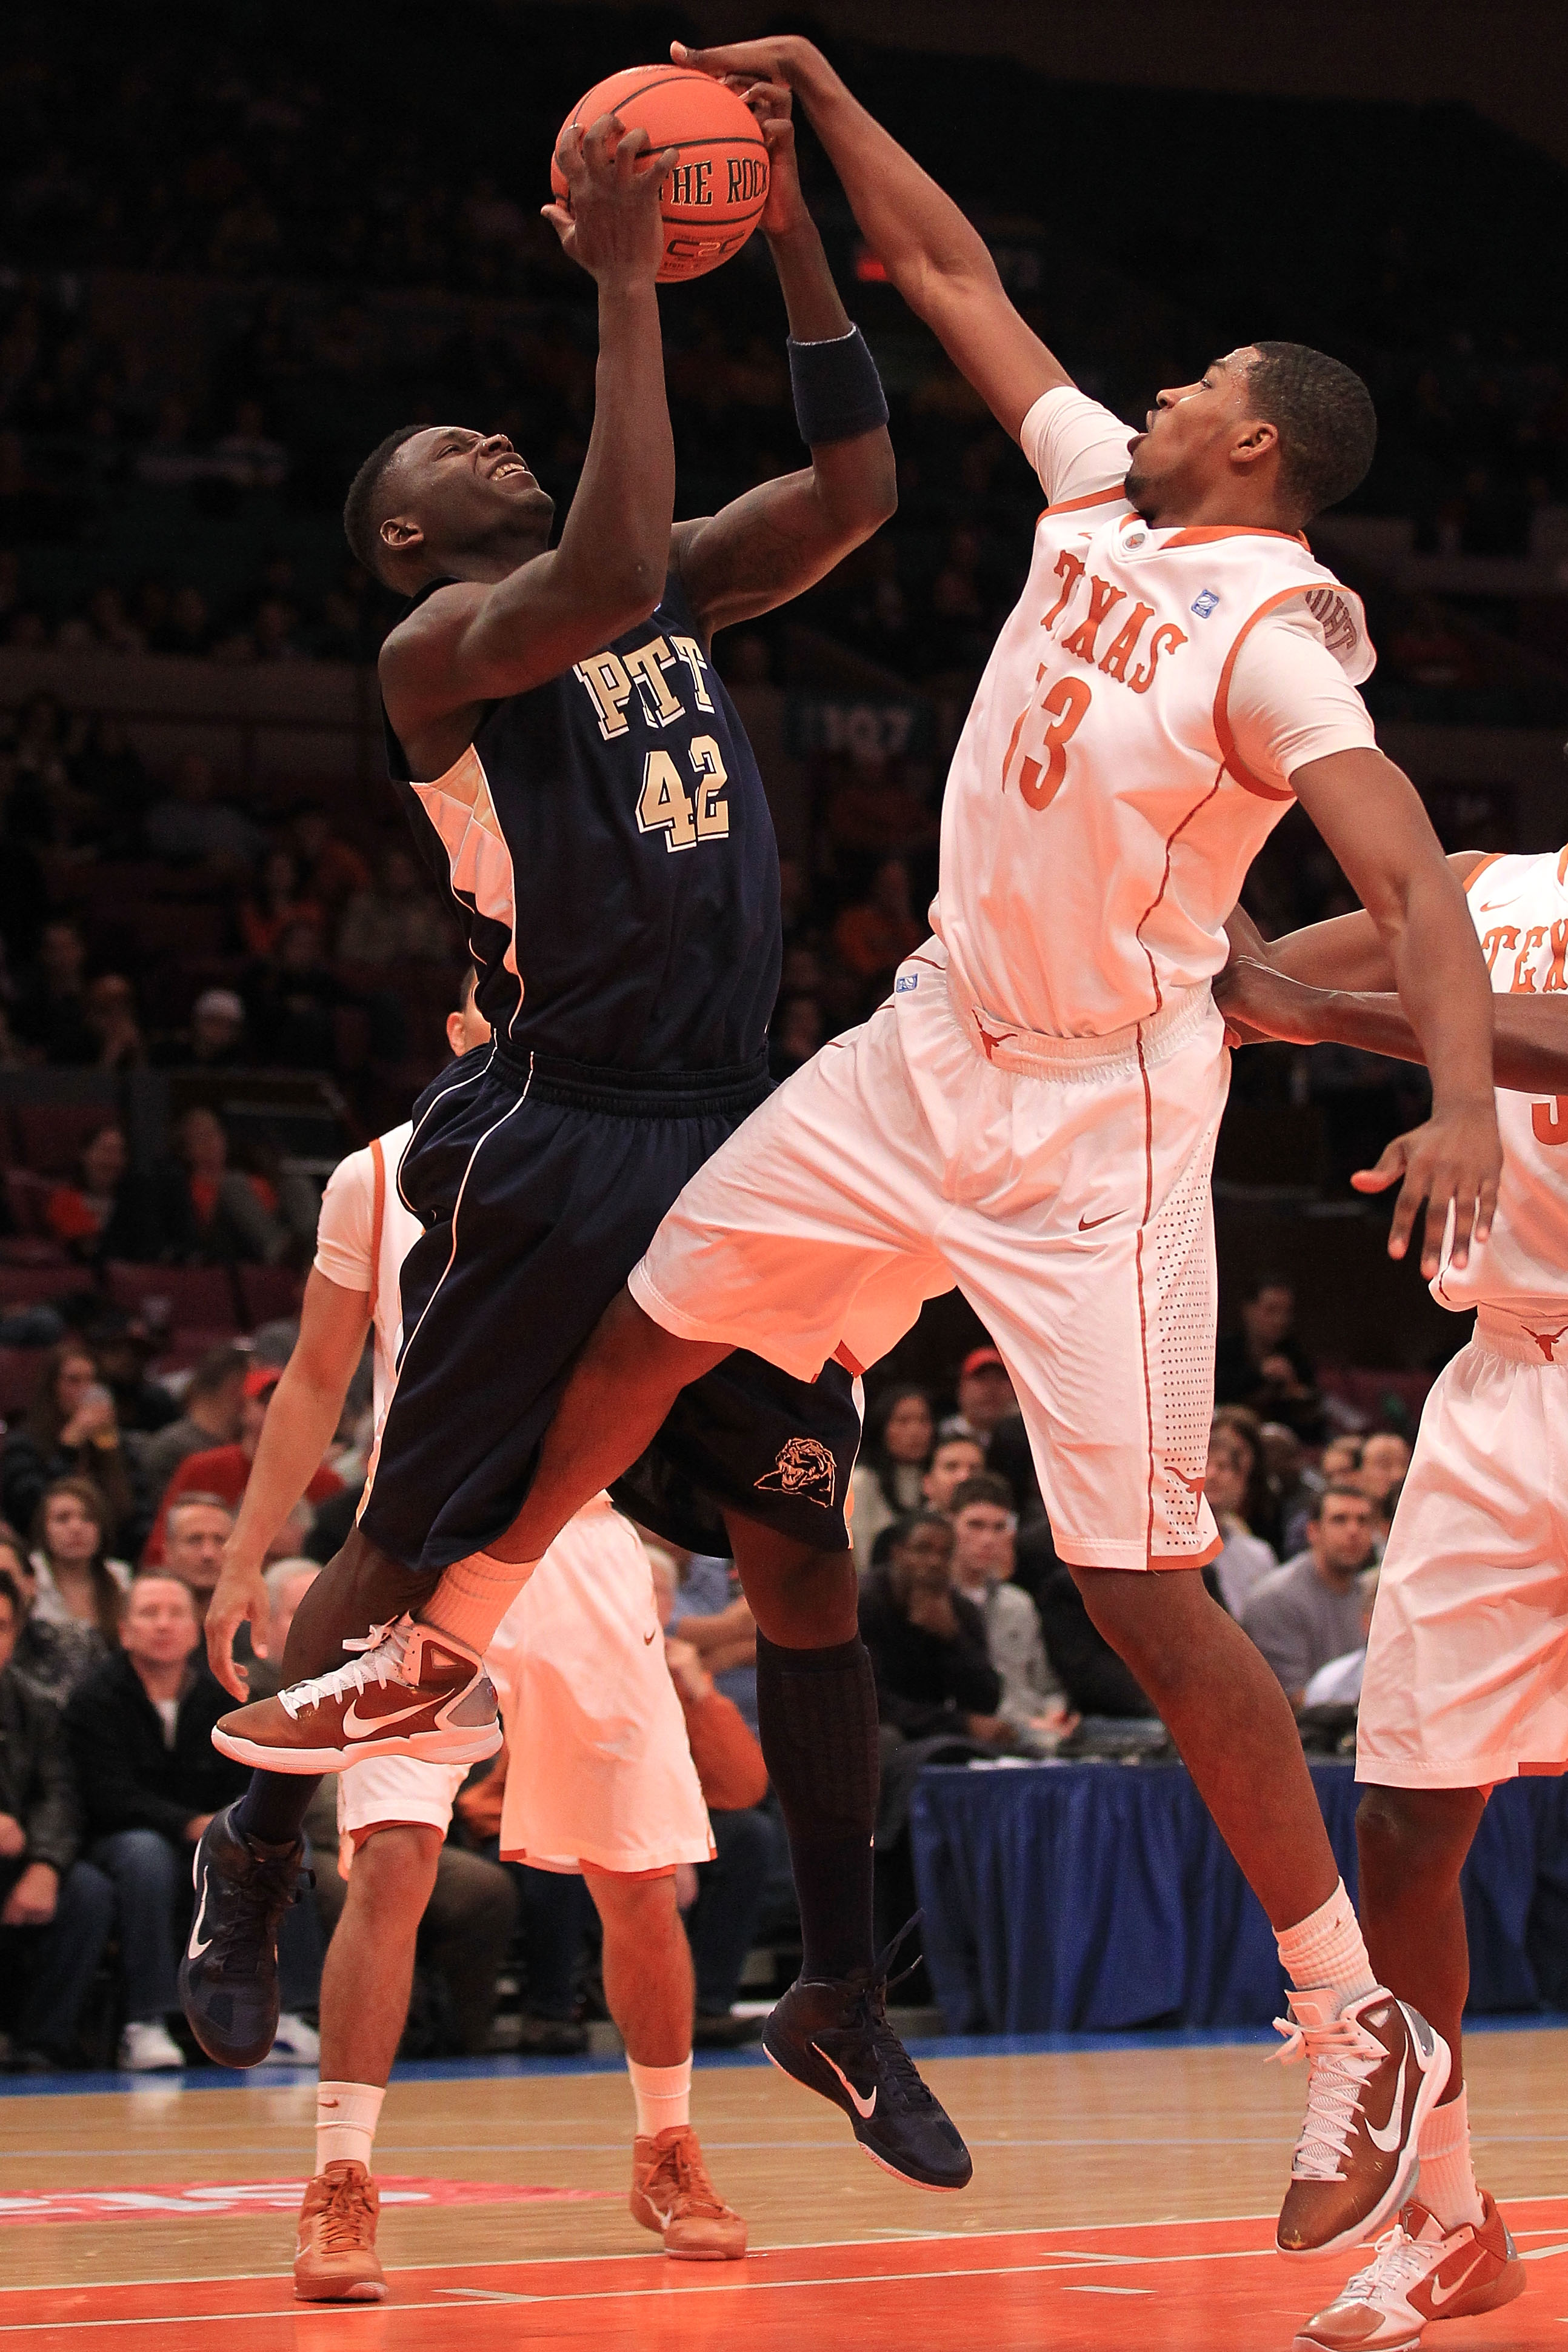 NEW YORK - NOVEMBER 19: Tristan Thompson #13 of the Texas Longhorns contests a rebound with Talib Zanna #42 of the Pittsburgh Panthers during the Championship game of the 2k Sports Classic at Madison Square Garden on November 19, 2010 in New York, New Yor